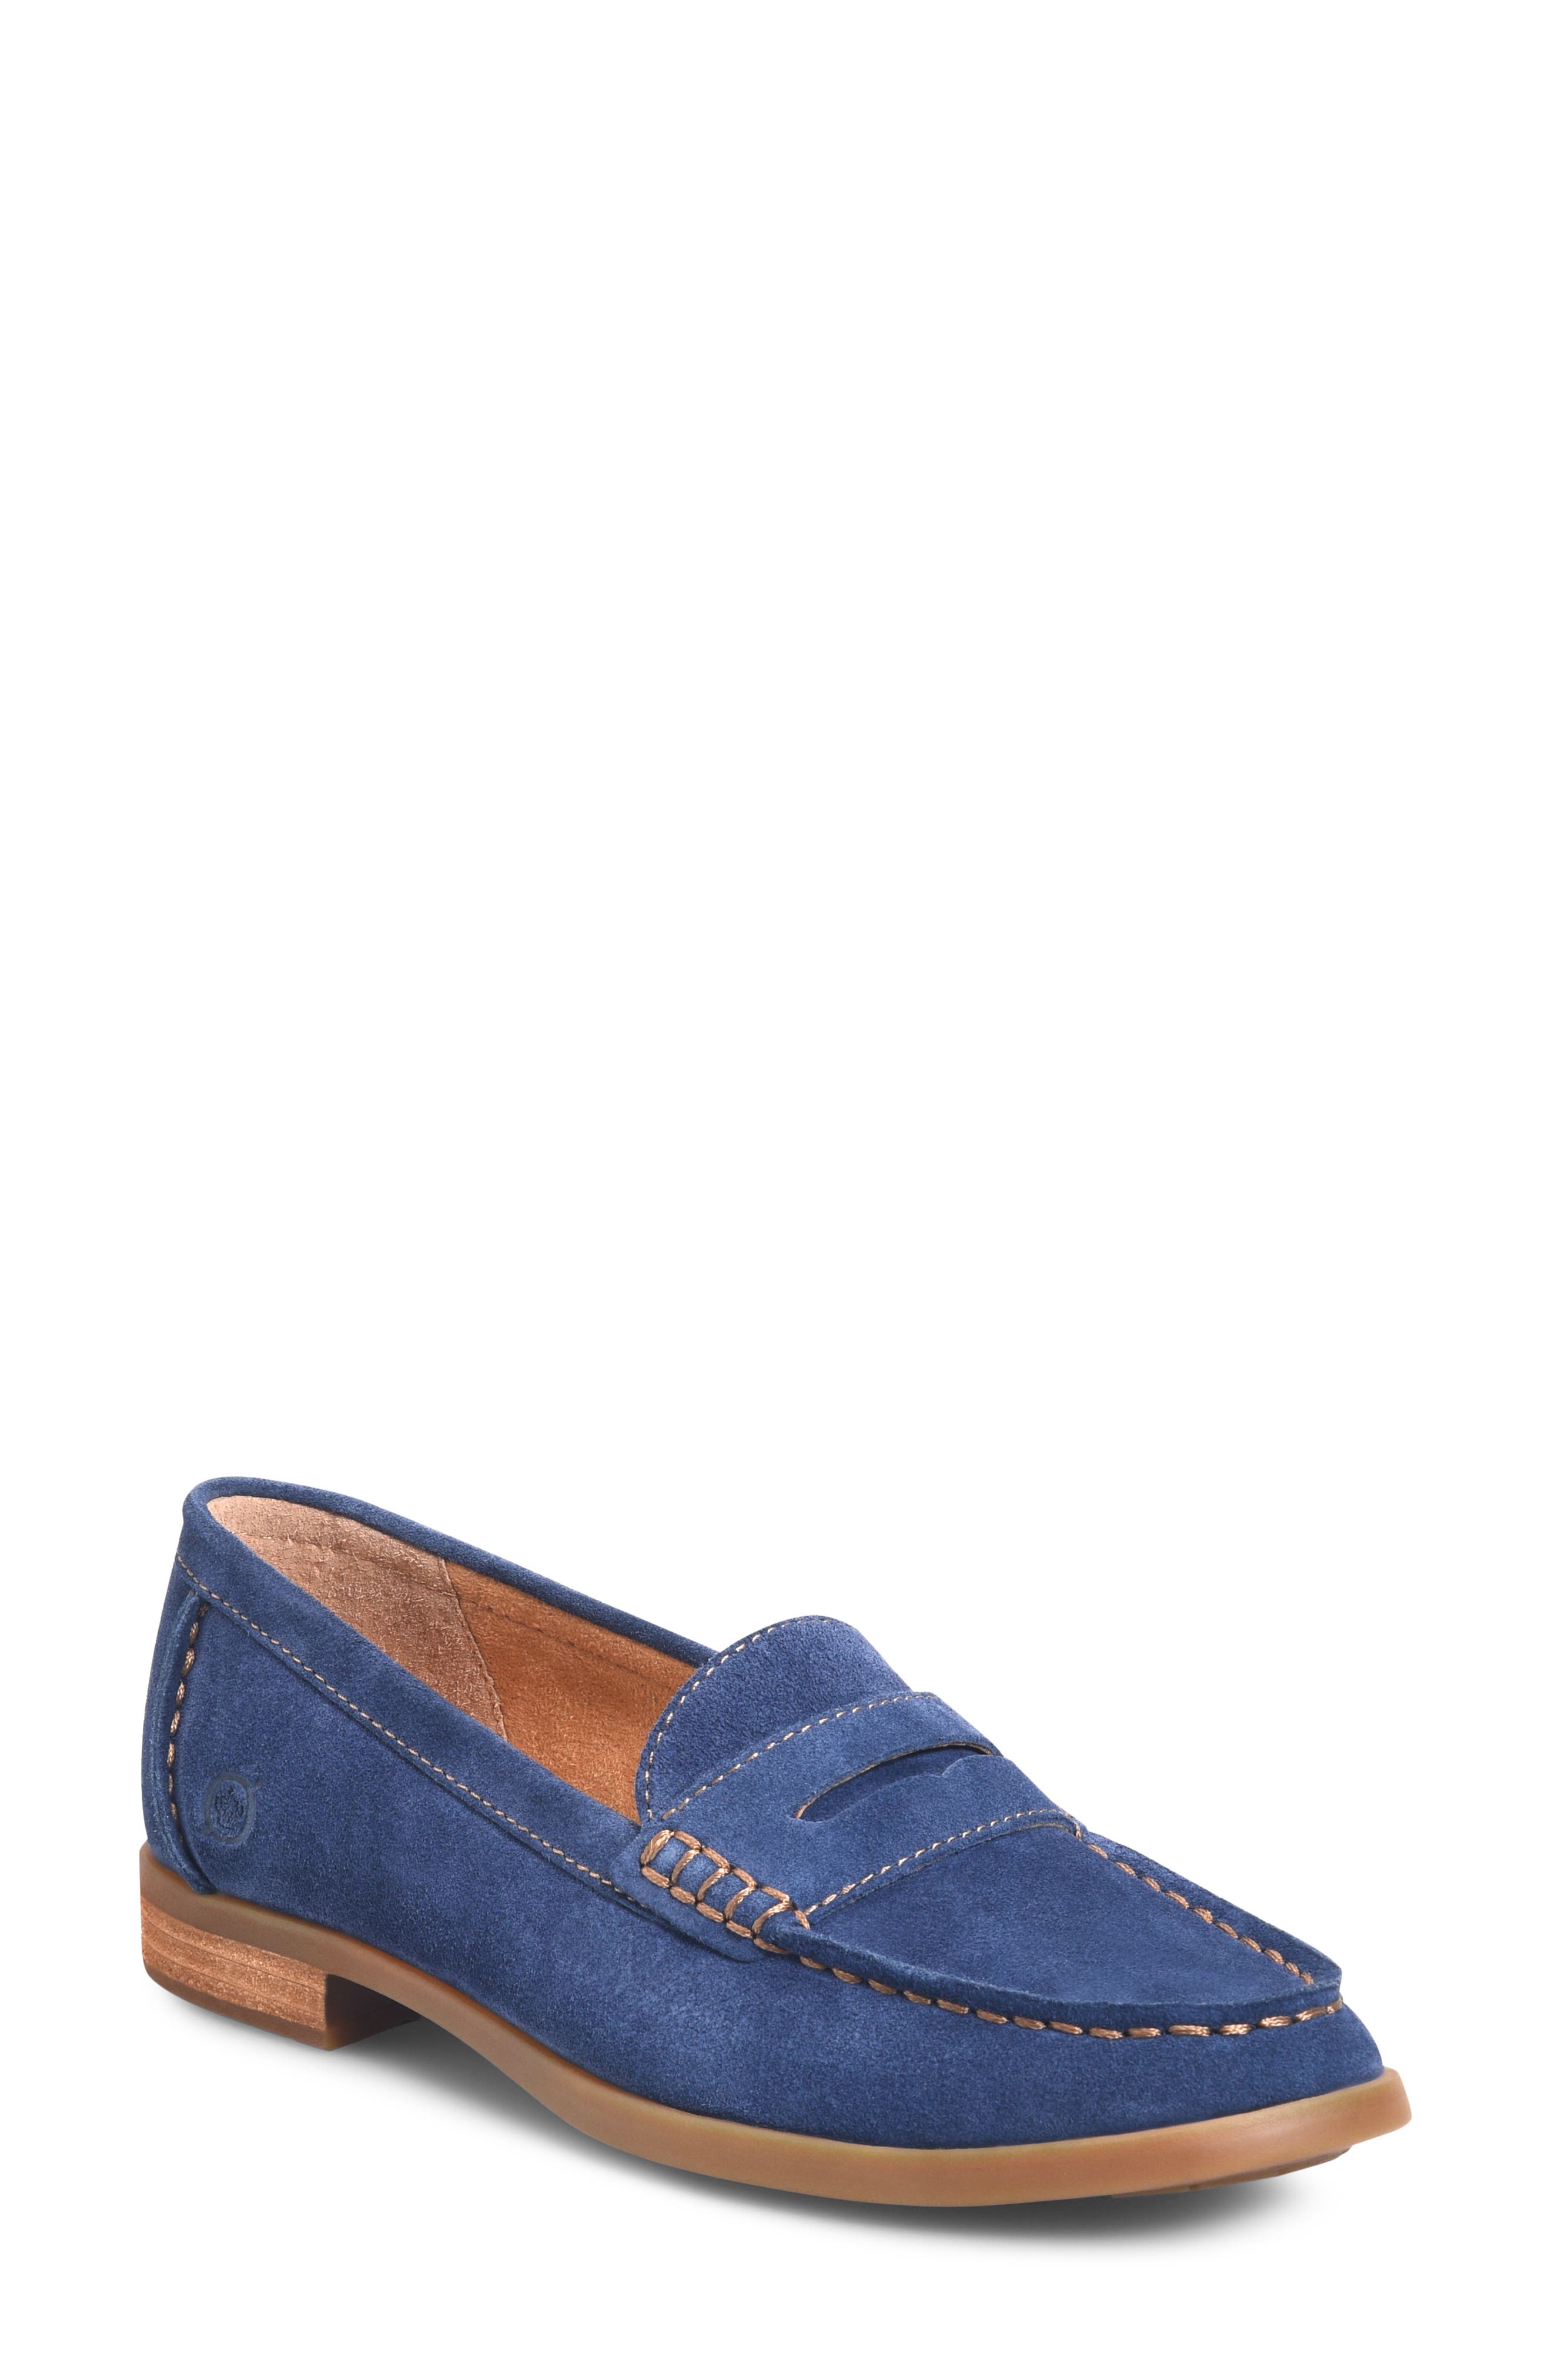 blue suede oxfords womens